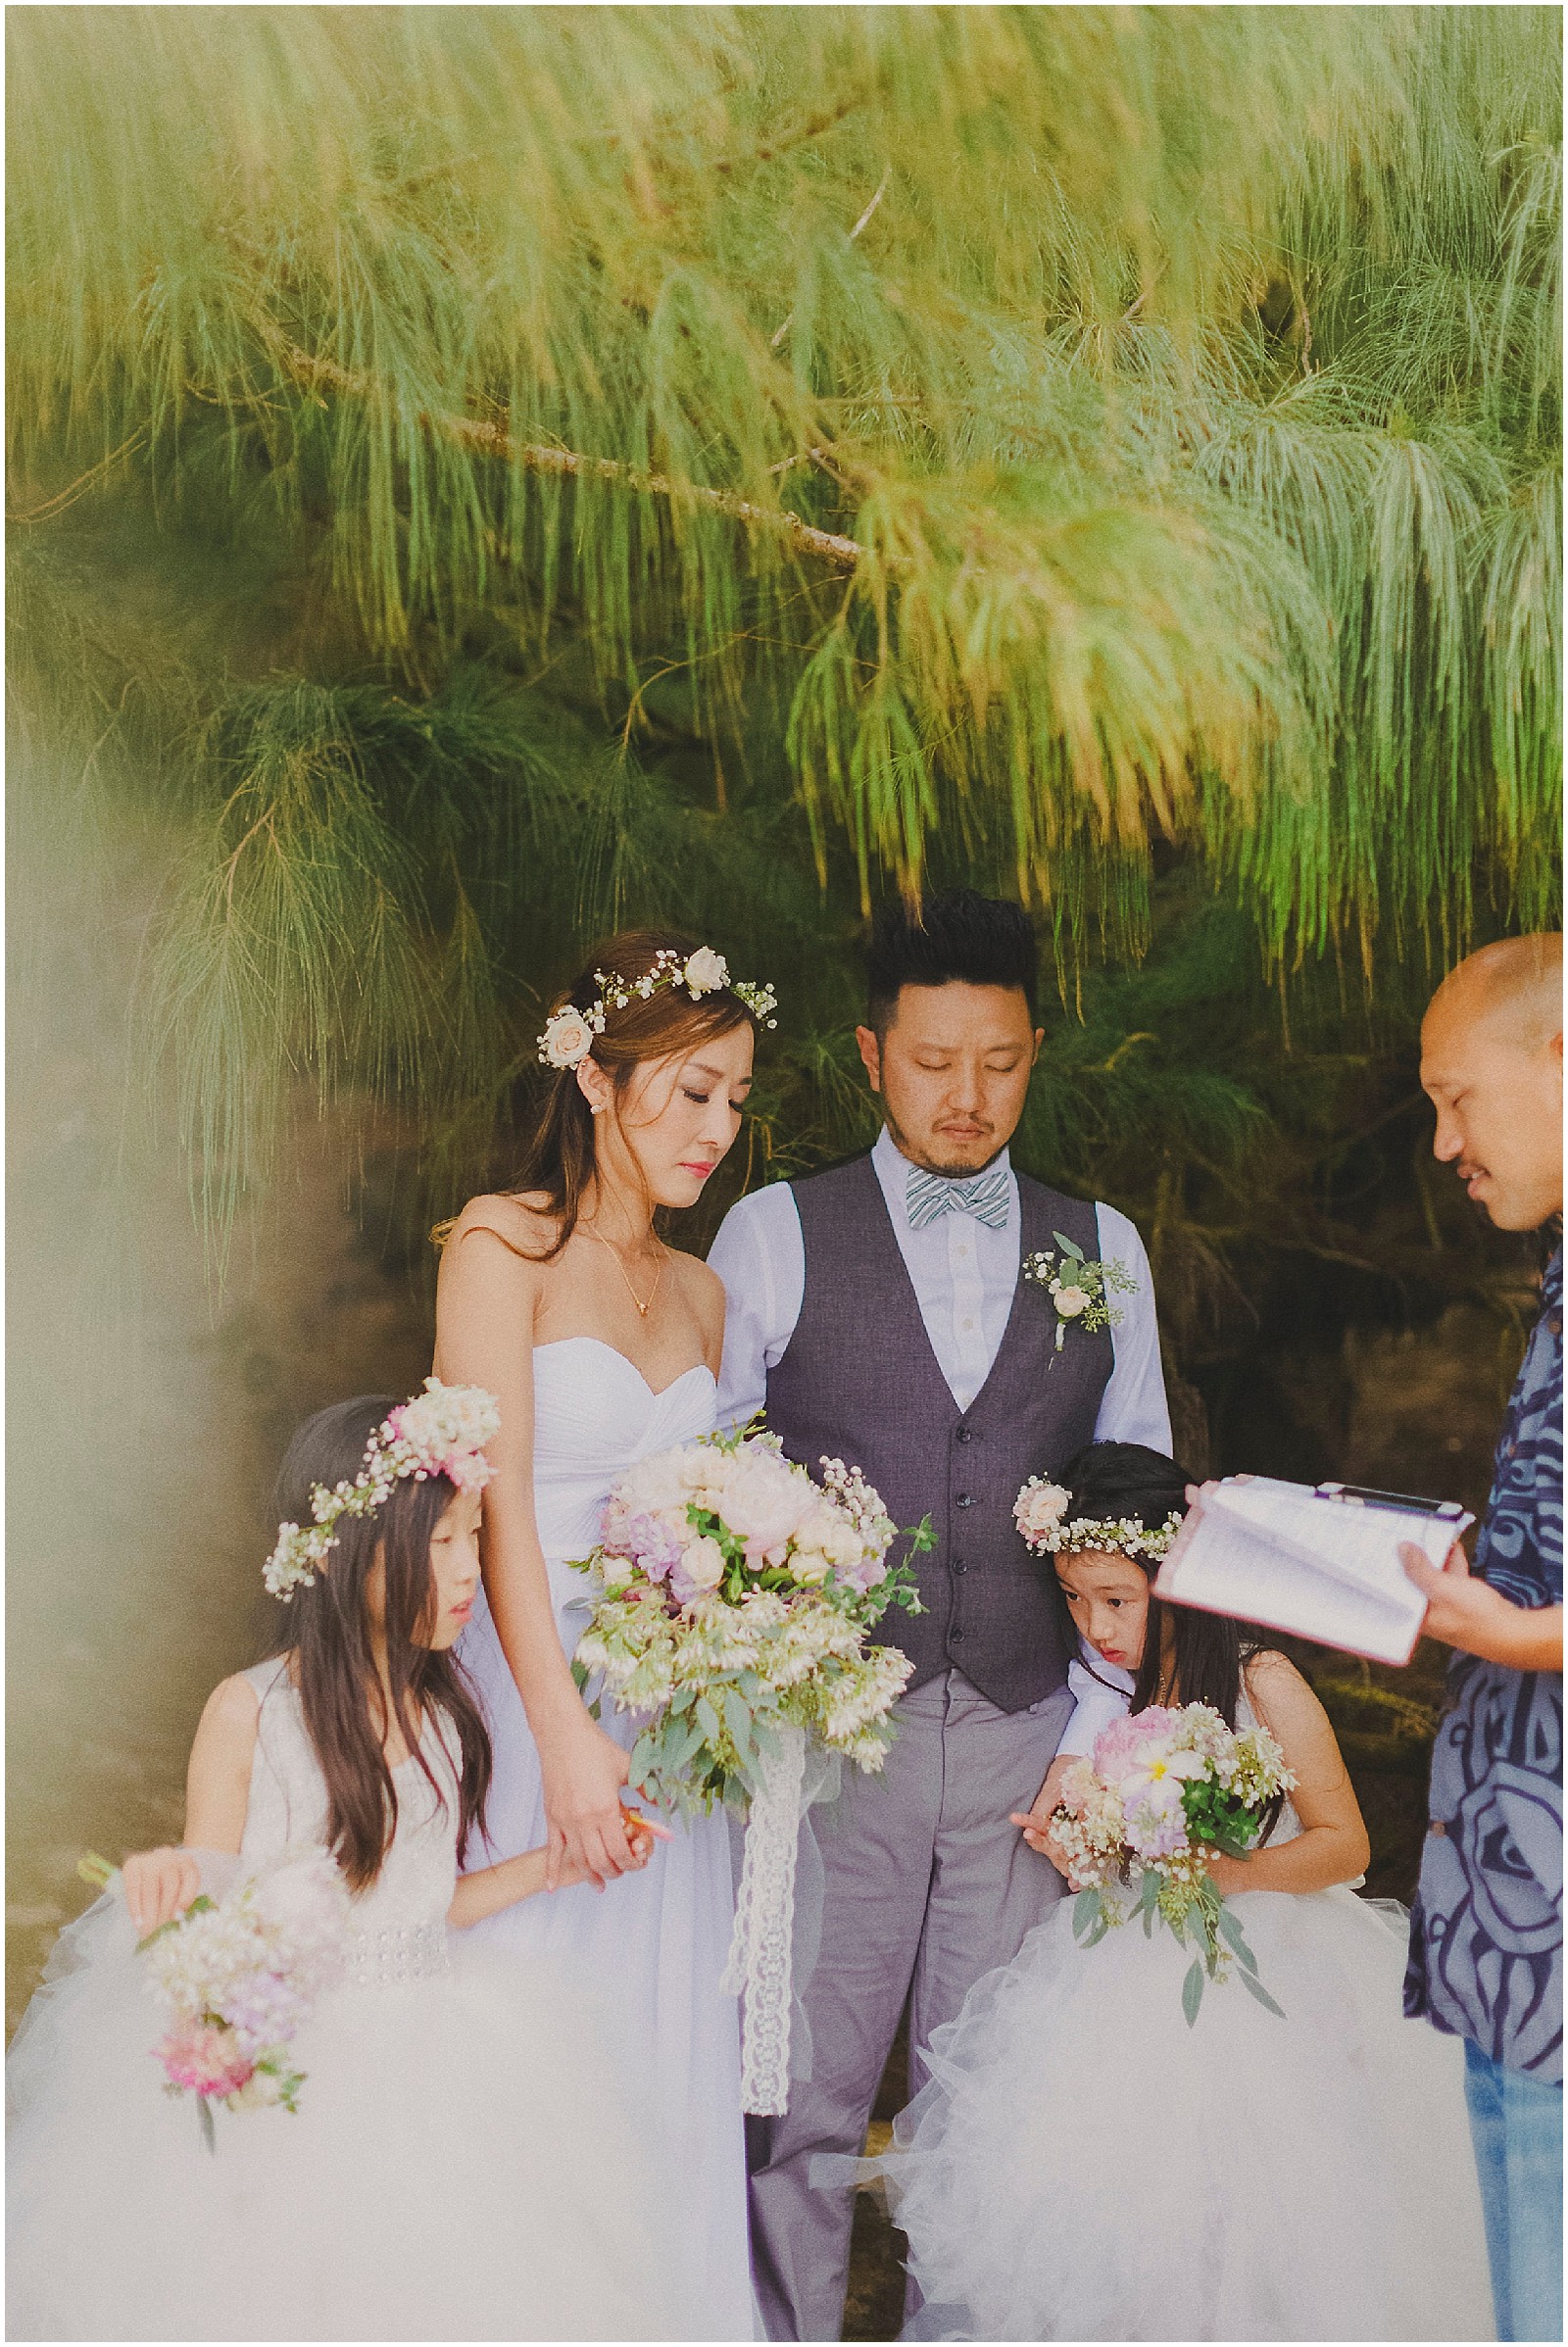 how to plan an intimate vow renewal ceremony | mommy diary ®